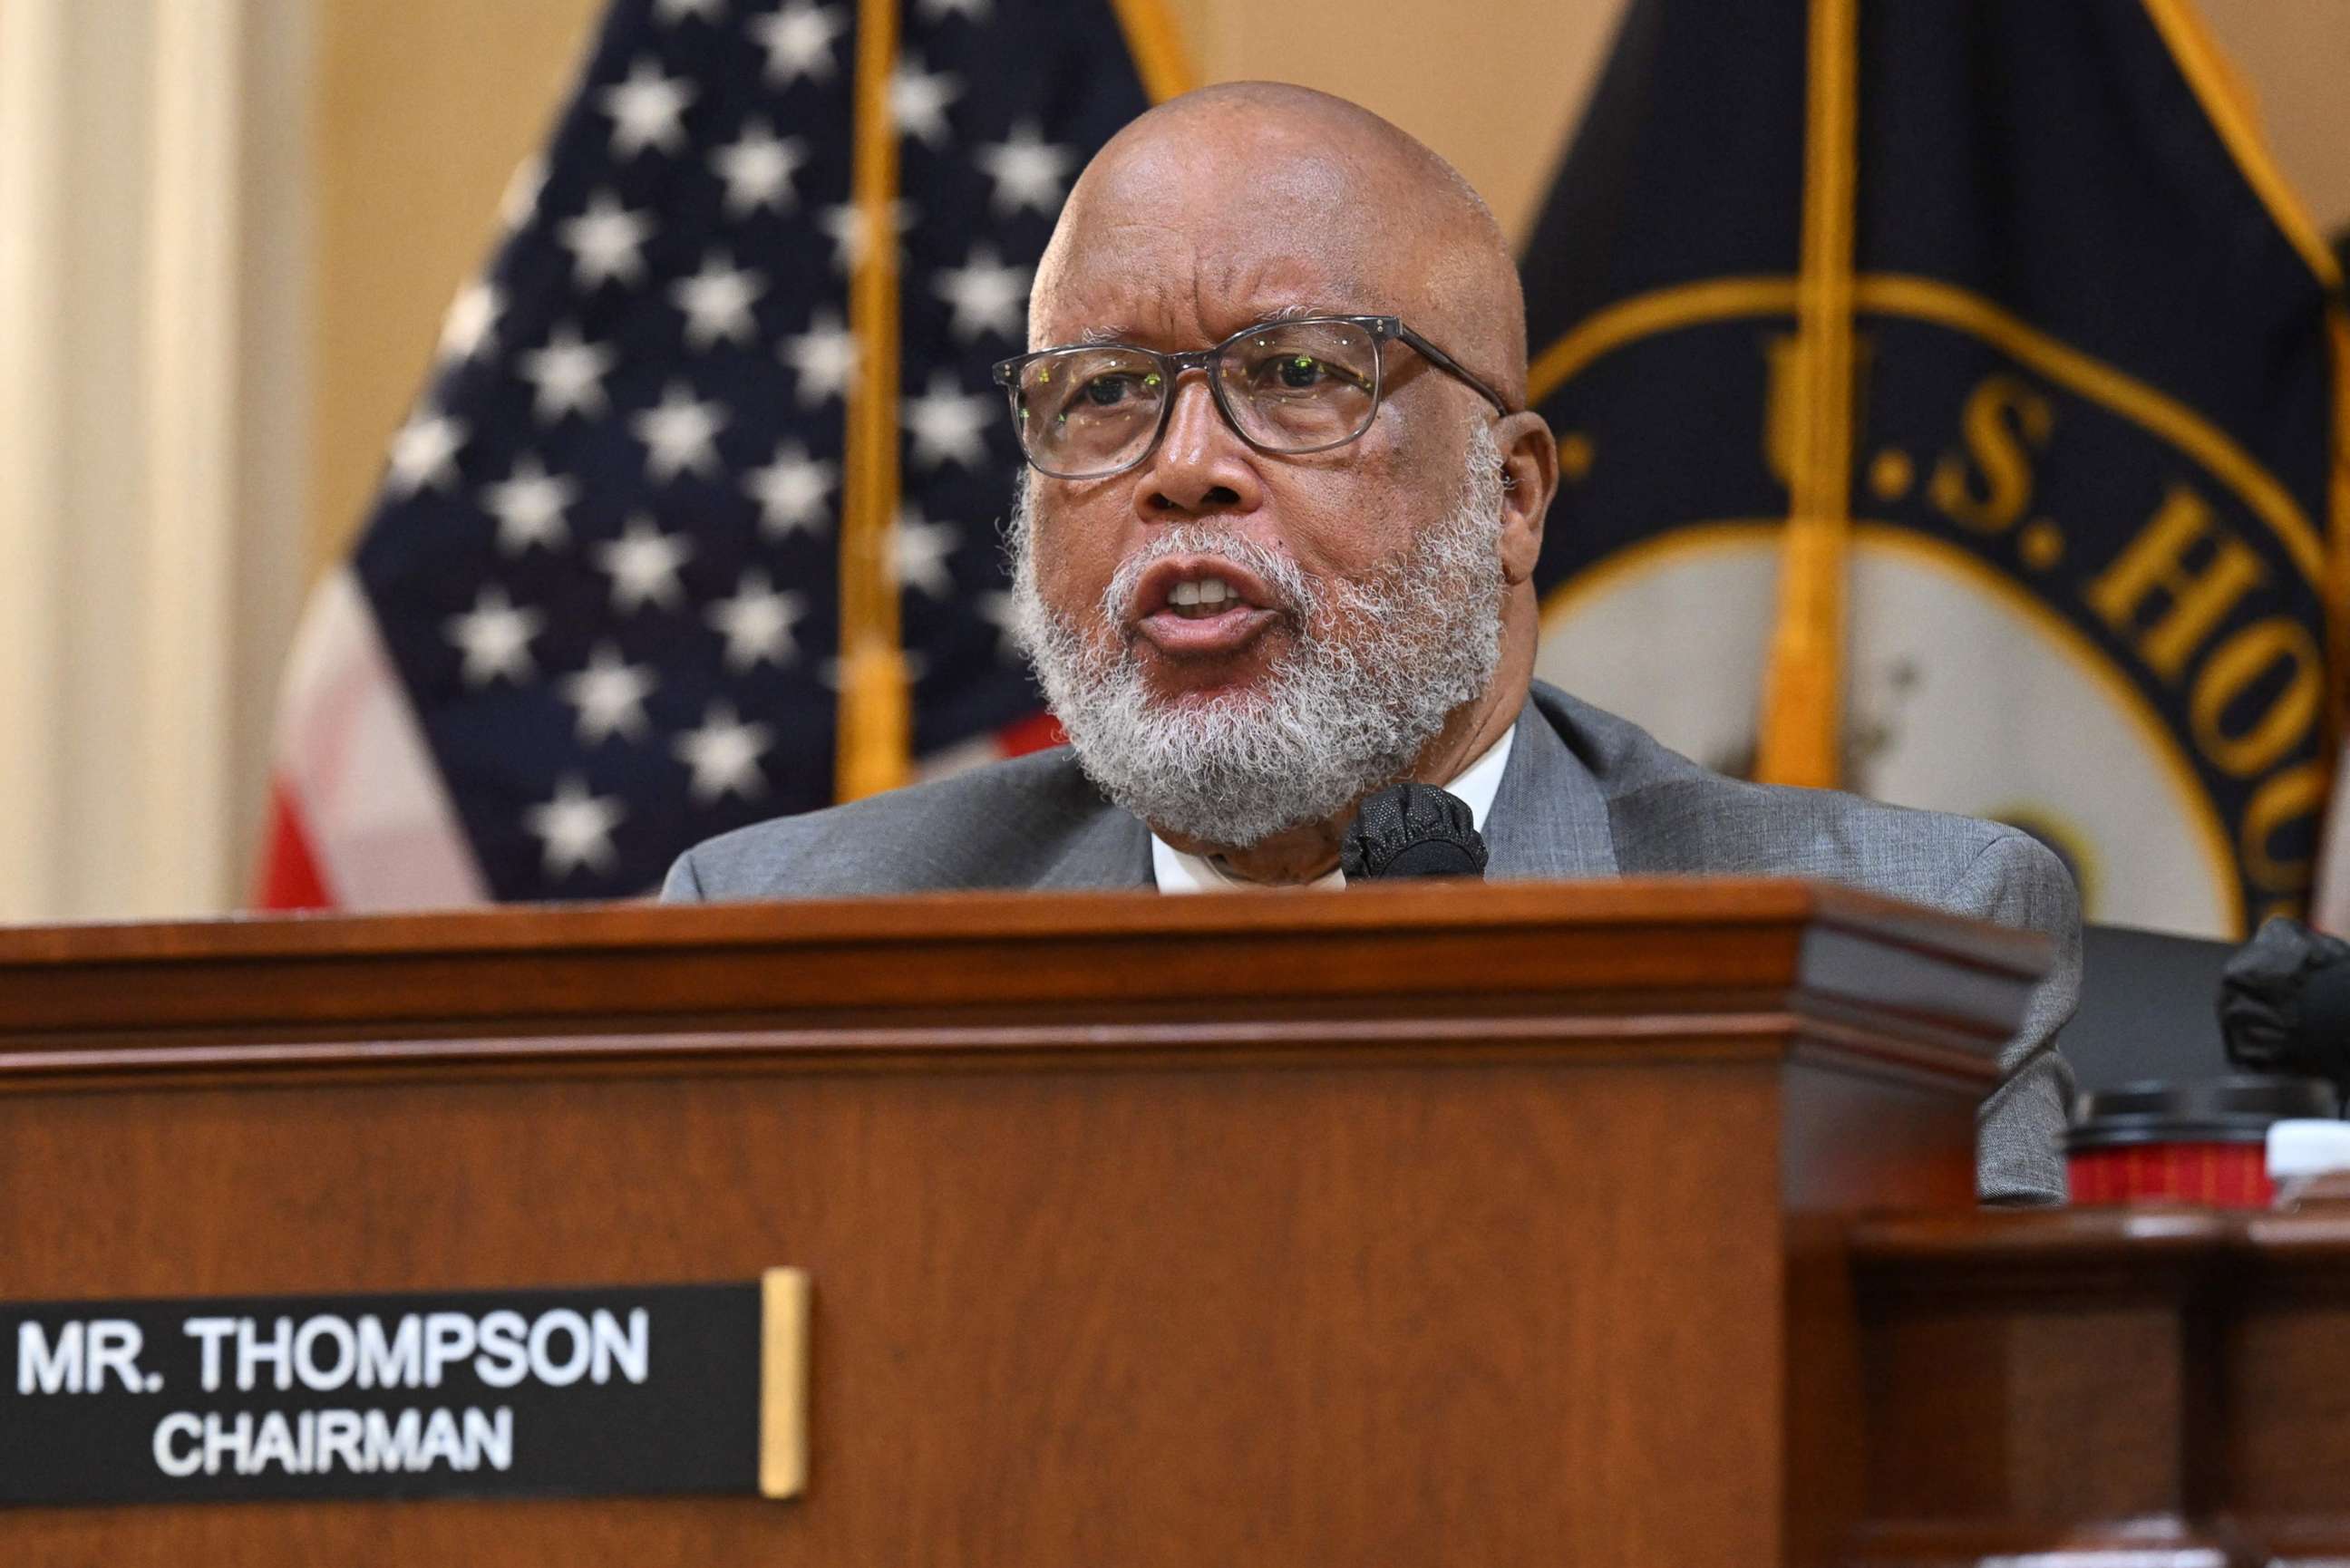 PHOTO:  Rep. Bennie Thompson, Chairman of the Select Committee to Investigate the Jan. 6th Attack on the US Capitol, speaks during a hearing on the Jan. 6th investigation on June 13, 2022 on Capitol Hill in Washington, D.C.